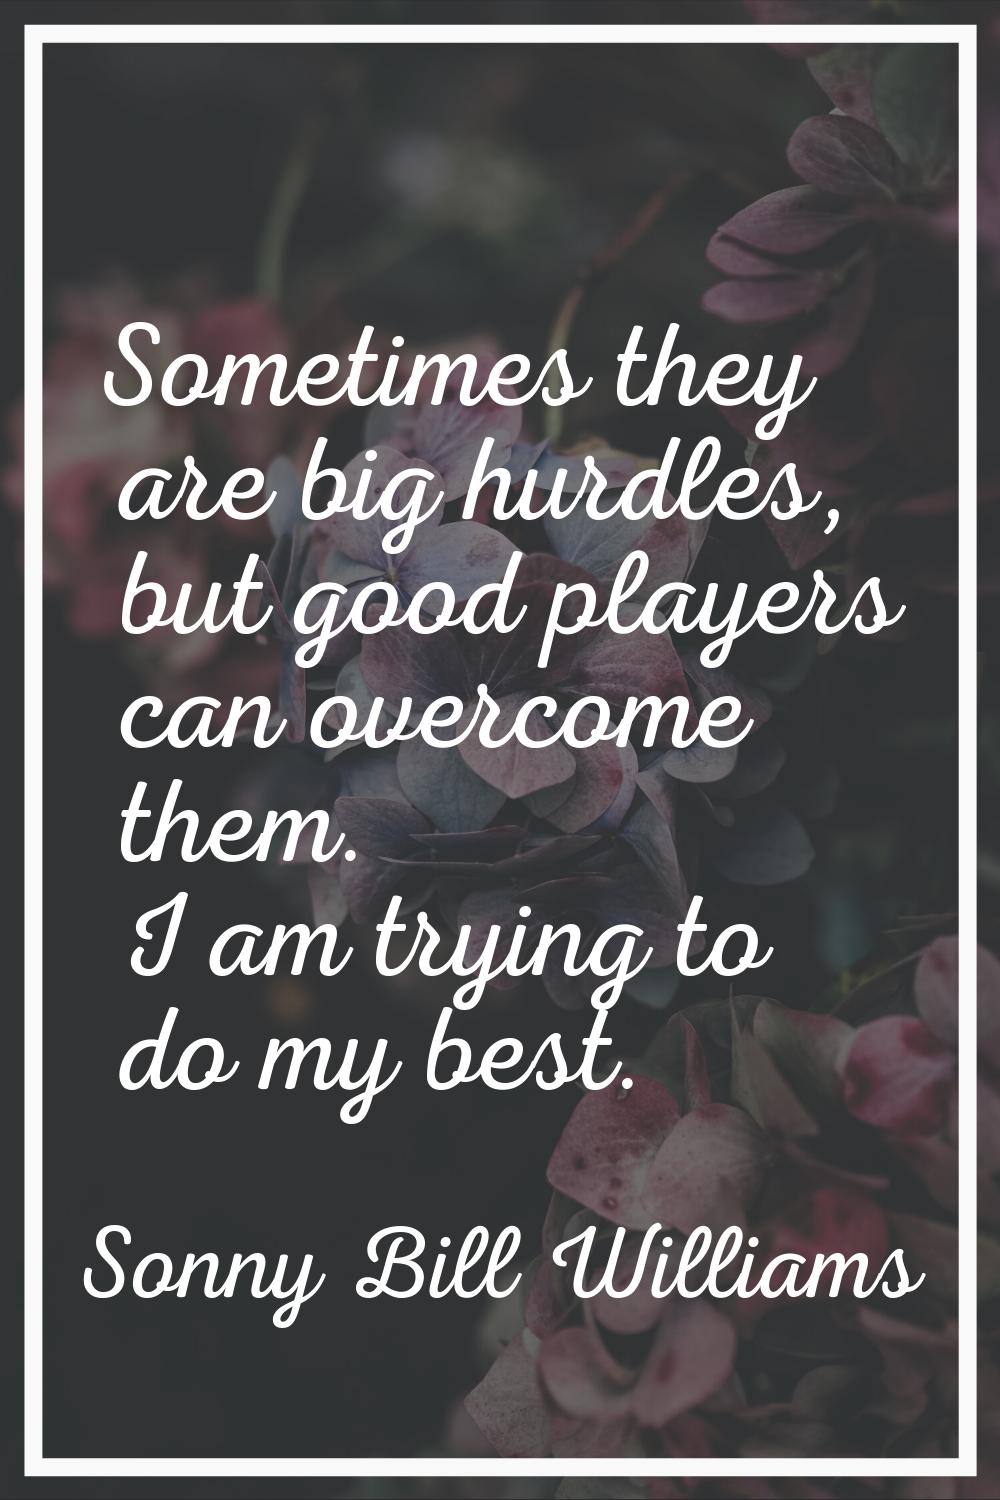 Sometimes they are big hurdles, but good players can overcome them. I am trying to do my best.